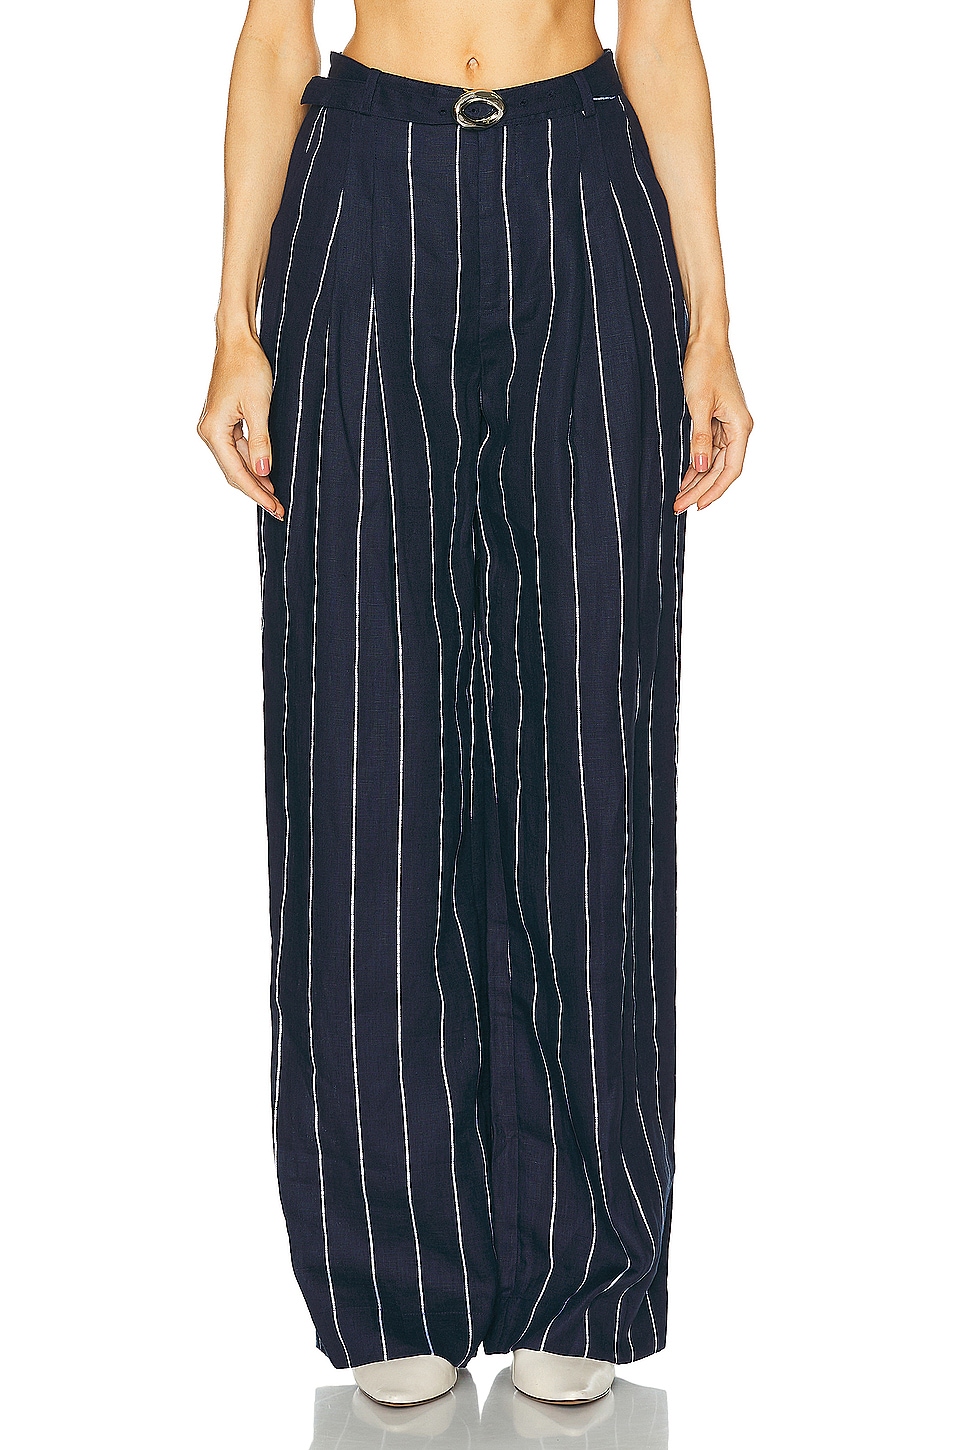 Calista Belted Wide Leg Pant in Navy